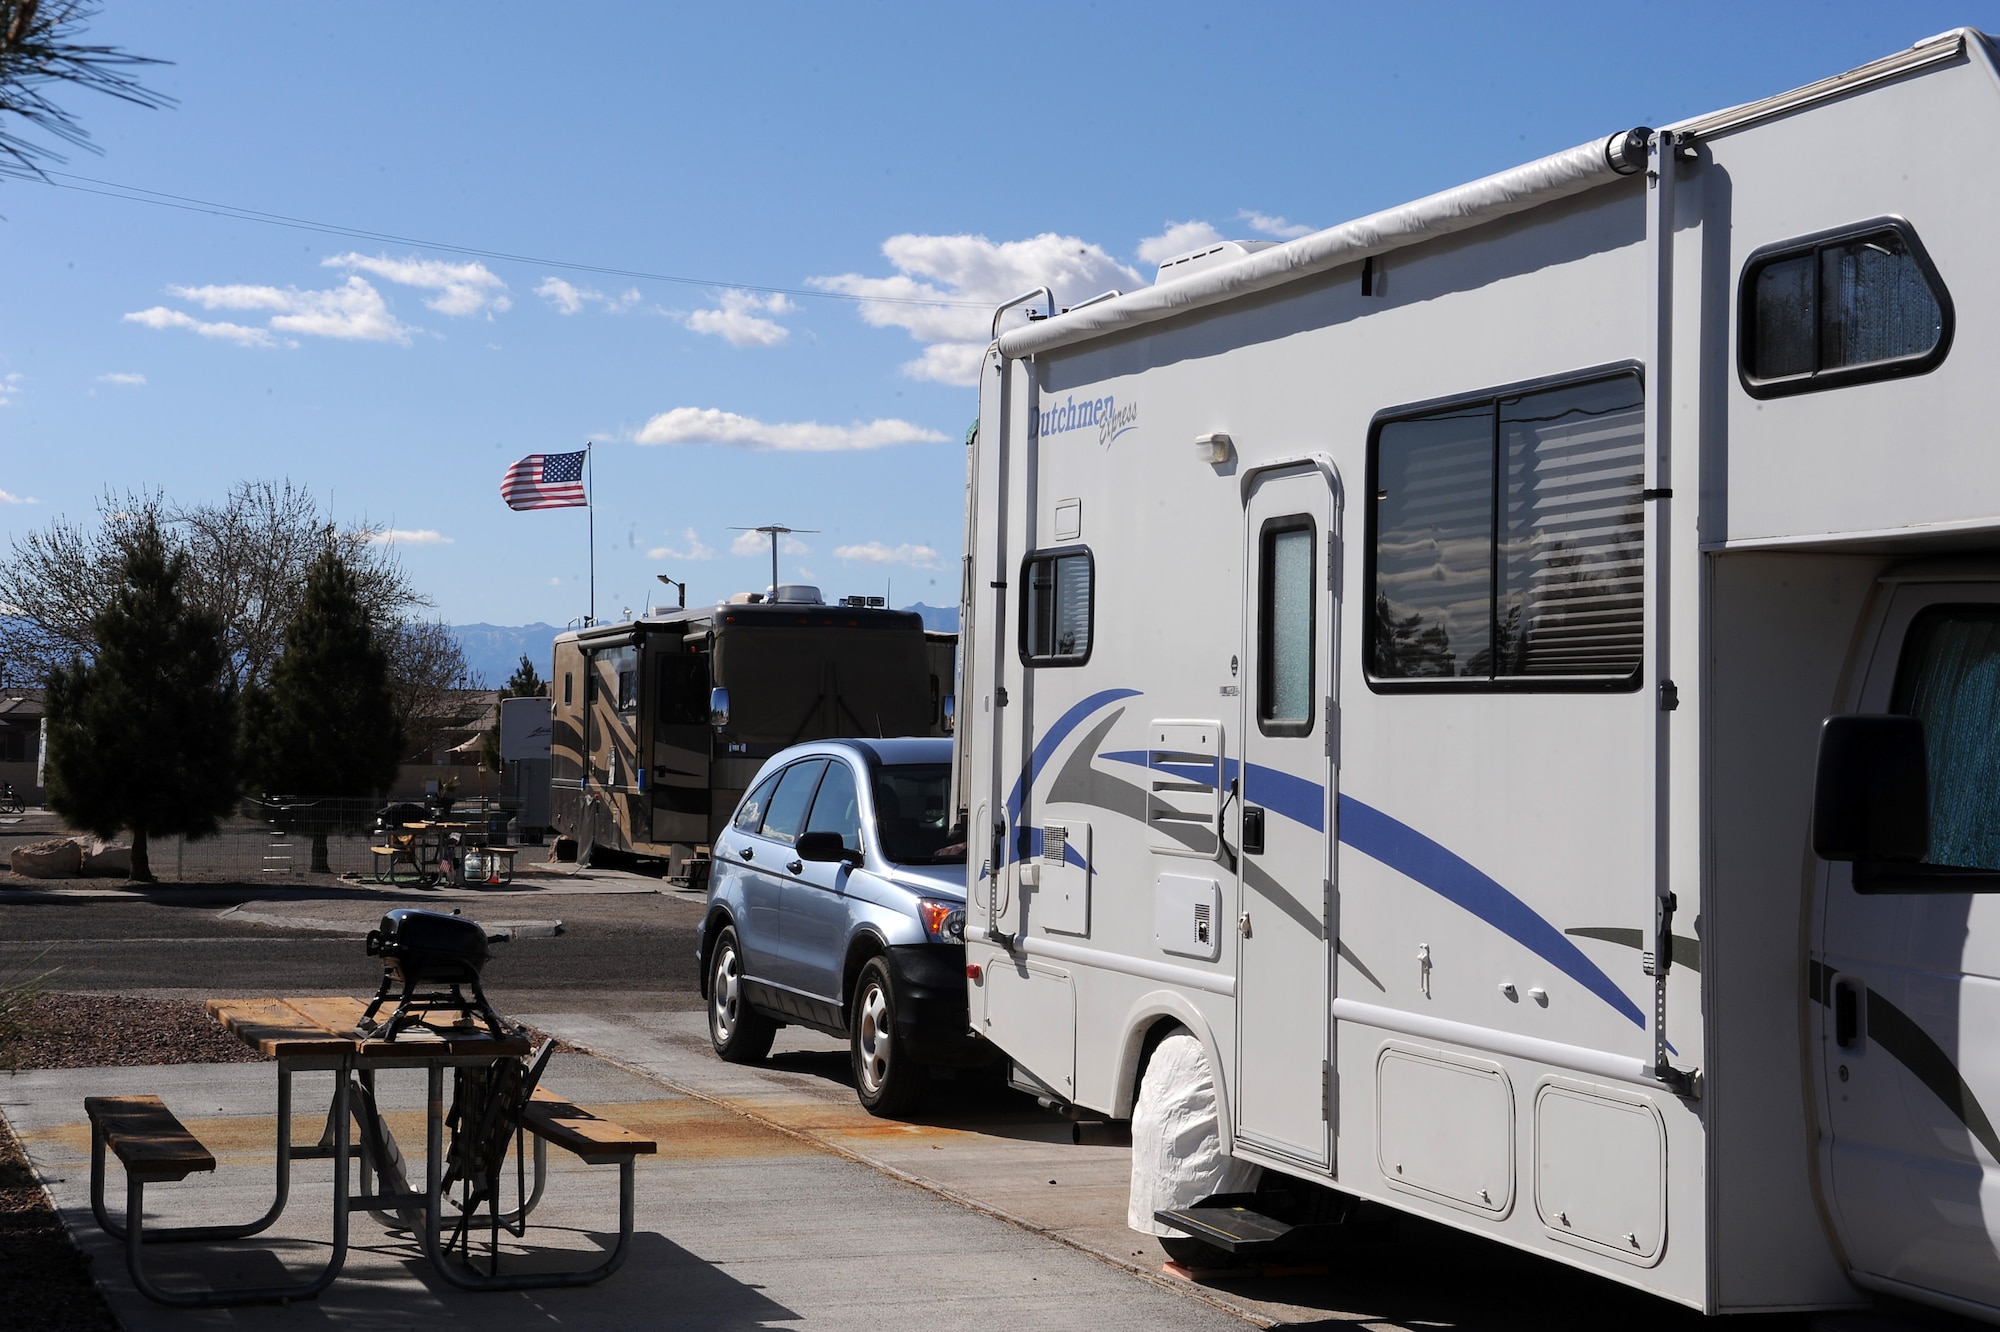 Recreational vehicles, like the one shown here, must be registered with Outdoor Recreation and parked in the Hanscom RV lot, located in the civil engineering compound, adjacent to building 1811 on Grenier Street. RVs can be parked for up to 24 hours in base housing, or in a temporary or marked space for short-term cleaning or repairs. (U.S. Air Force photo by Senior Airman Jack Sanders)